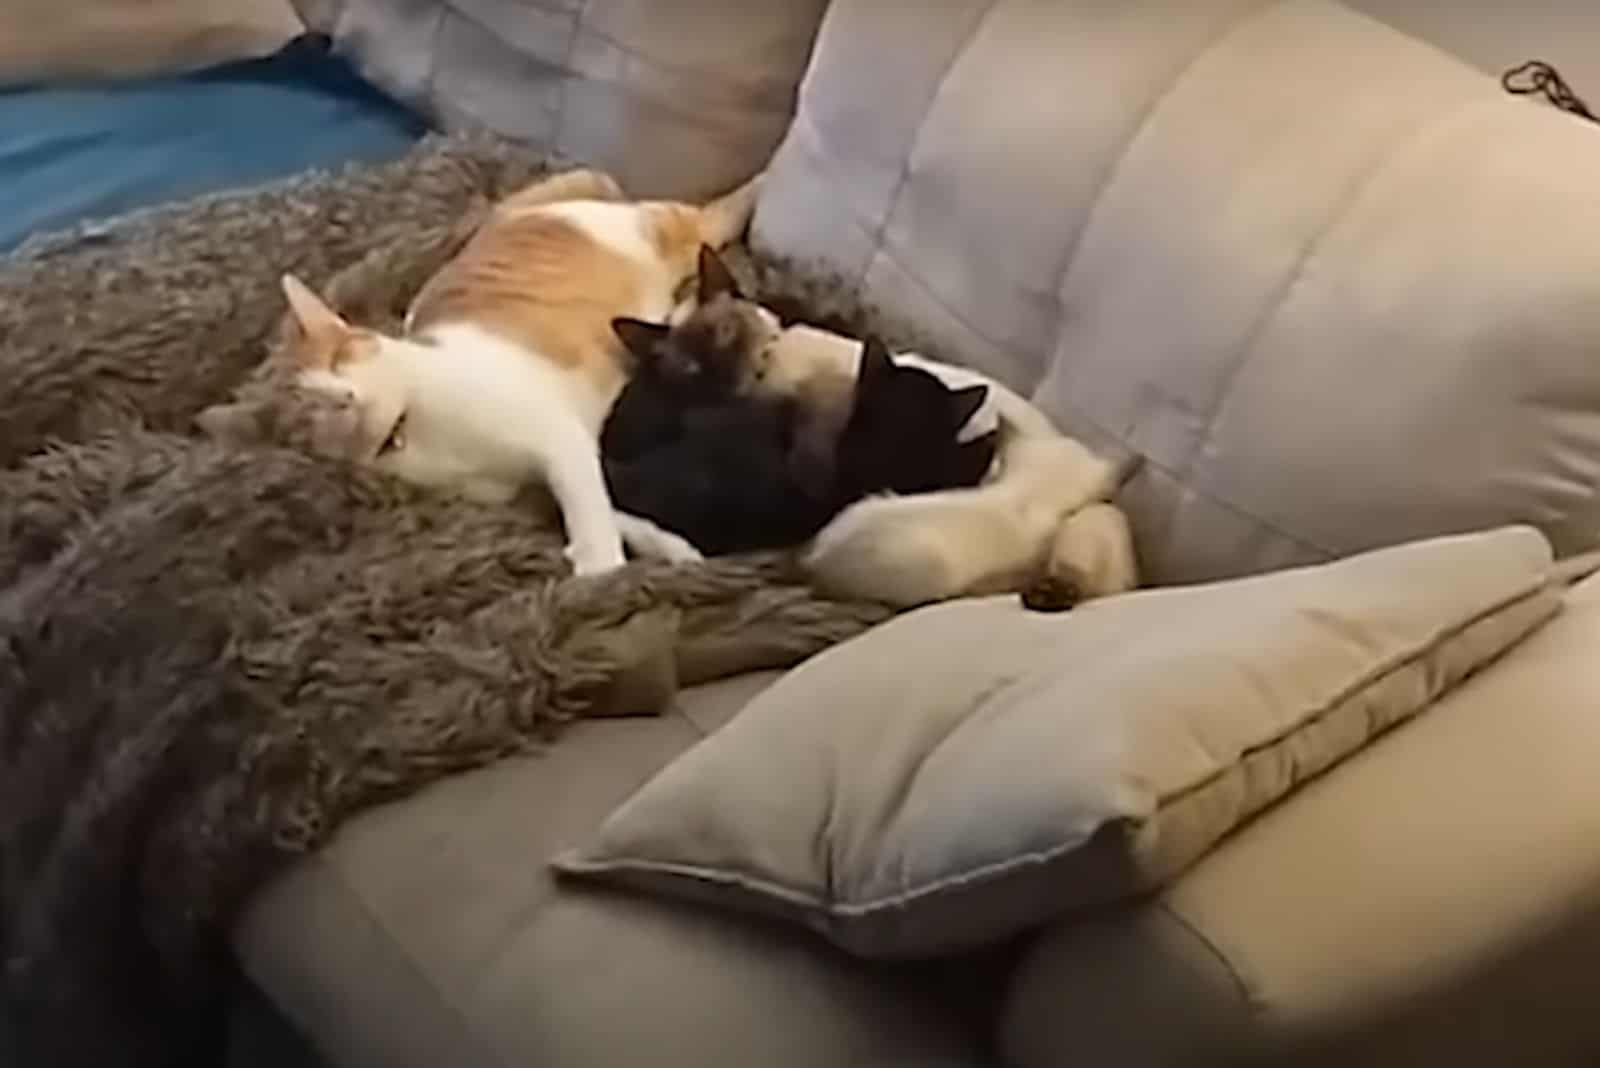 the cat sleeps on the couch next to the kitten